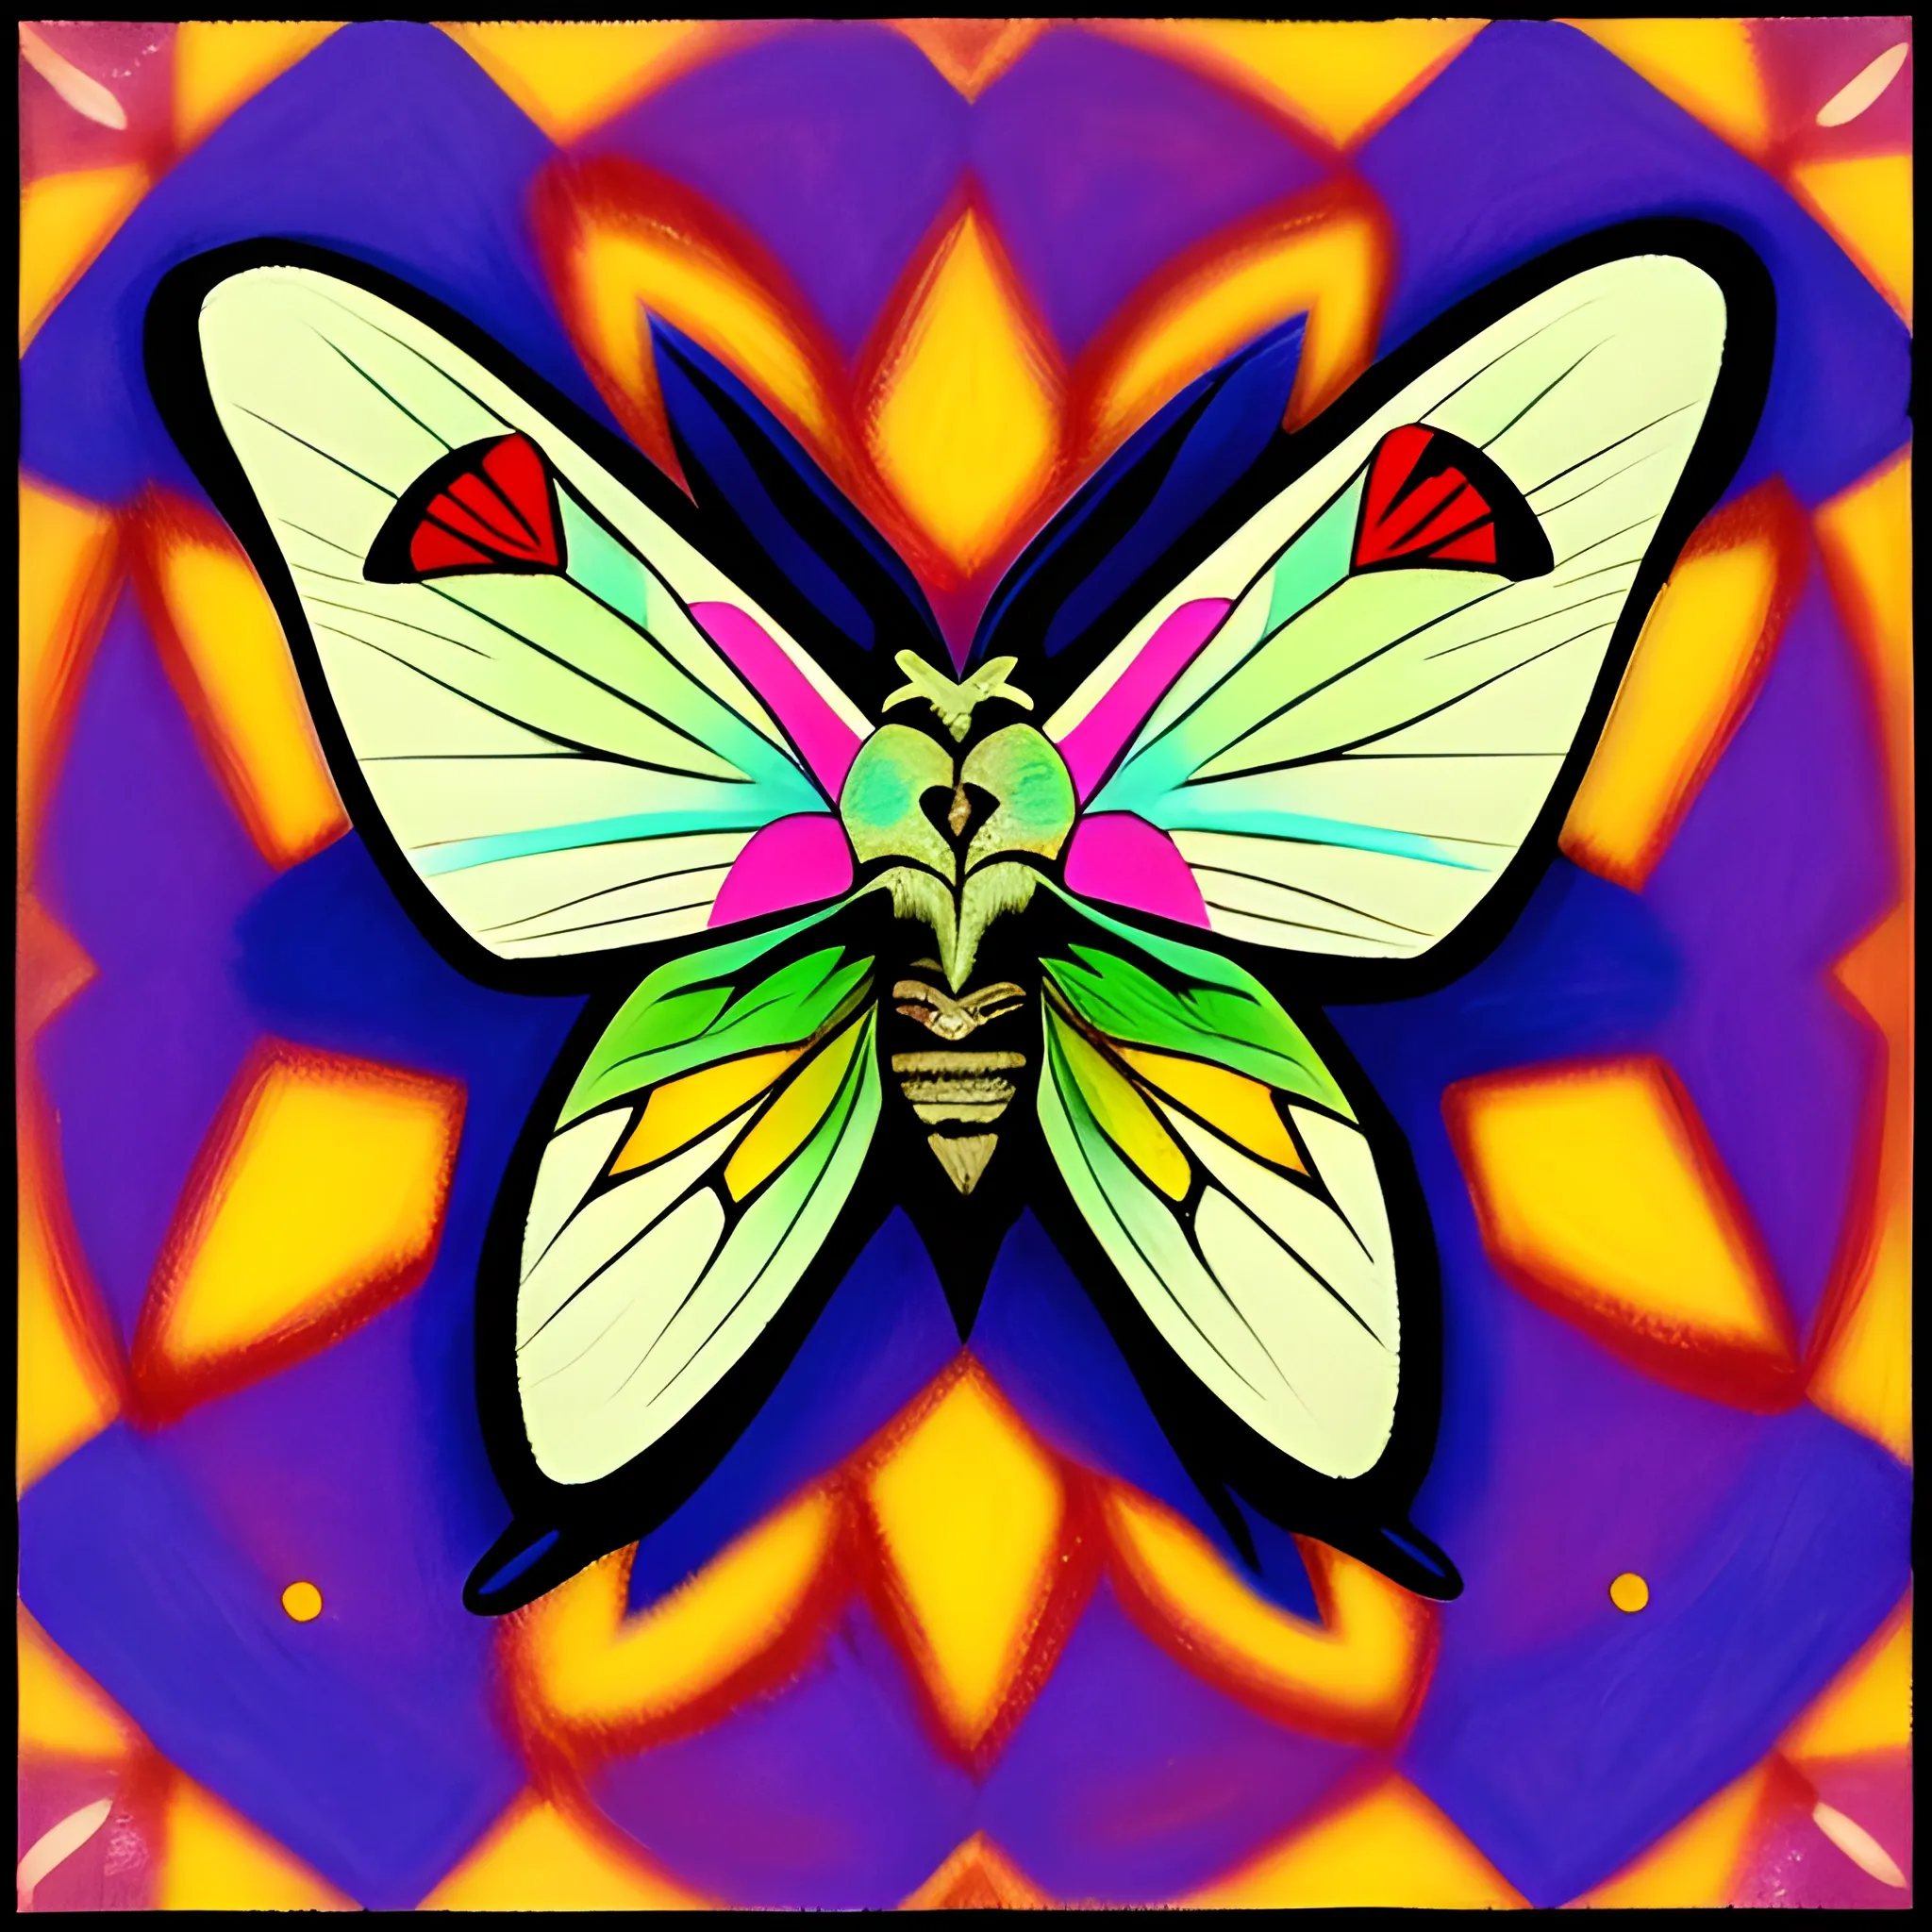 a moth using a "Tschabalala Self" style of art. specifically using the example of the work art named "floor dance"